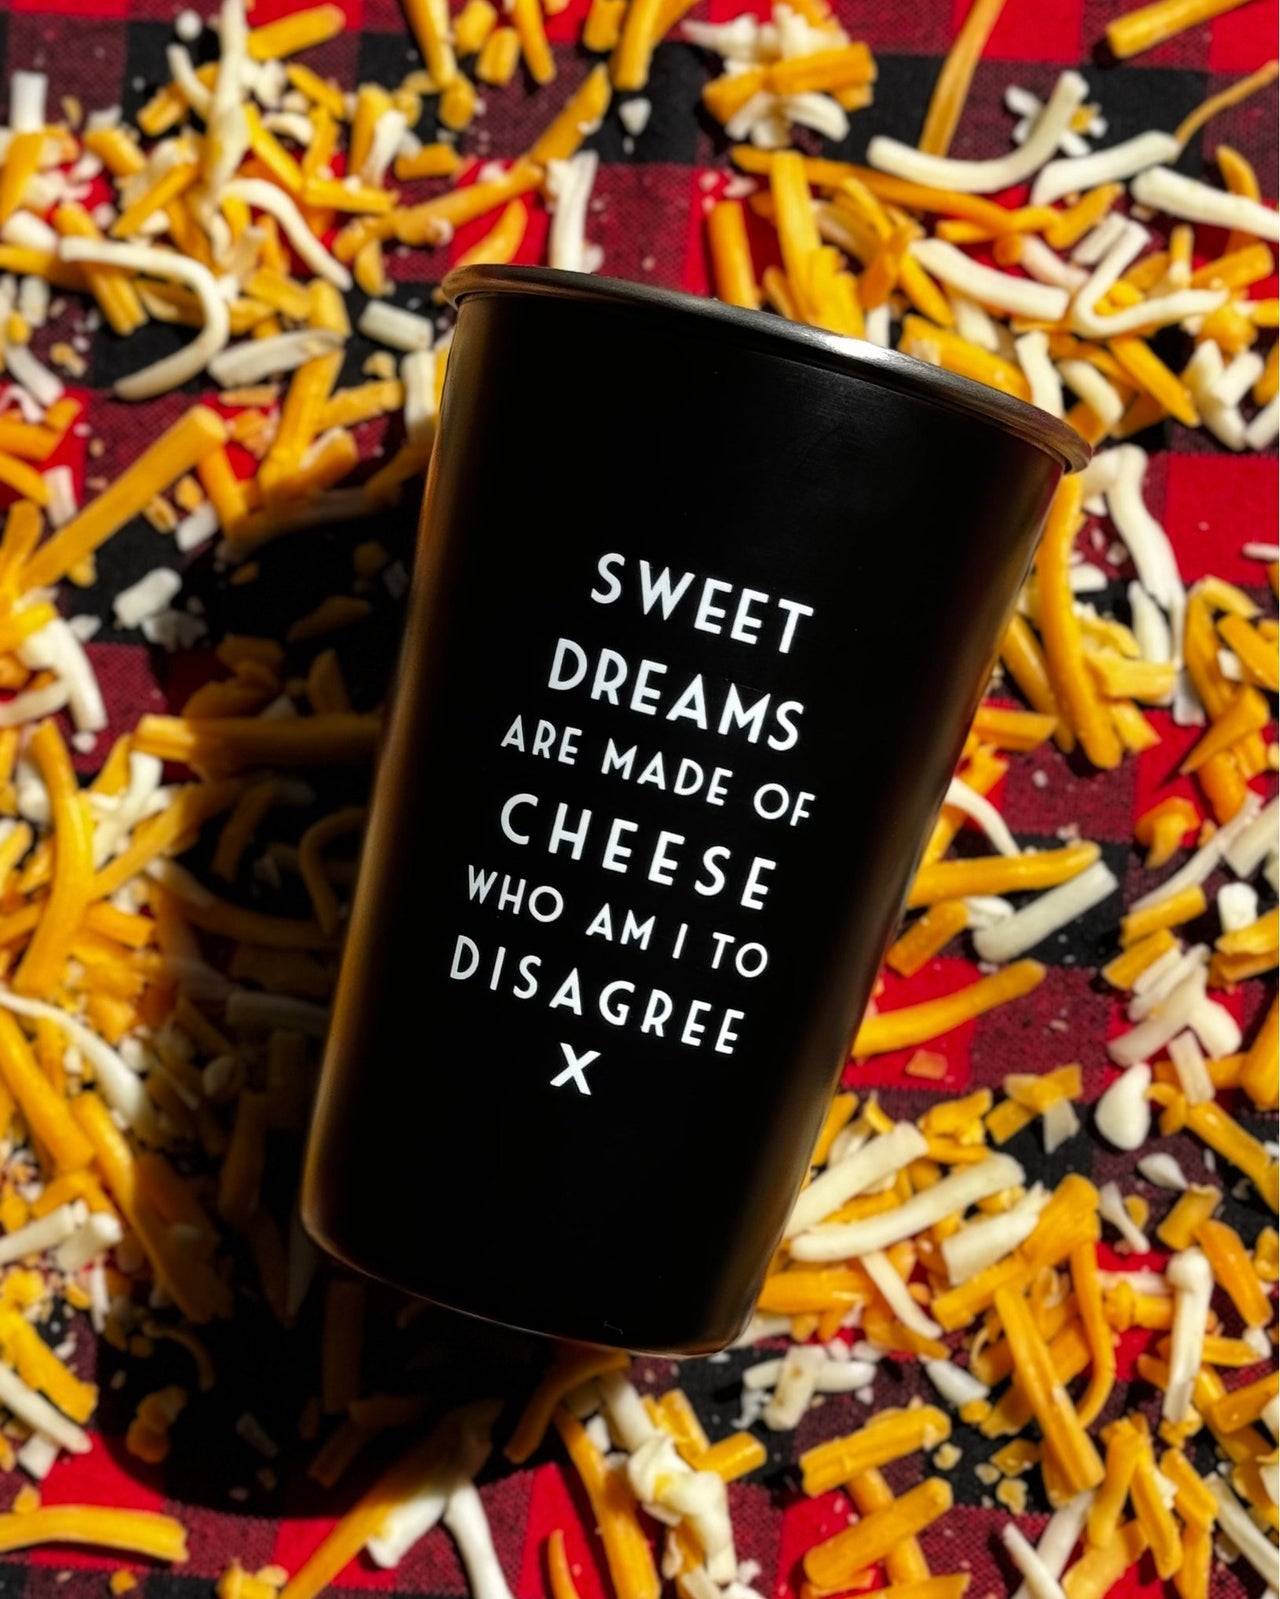 Sweet Dreams are Made of Cheese Pint Glass